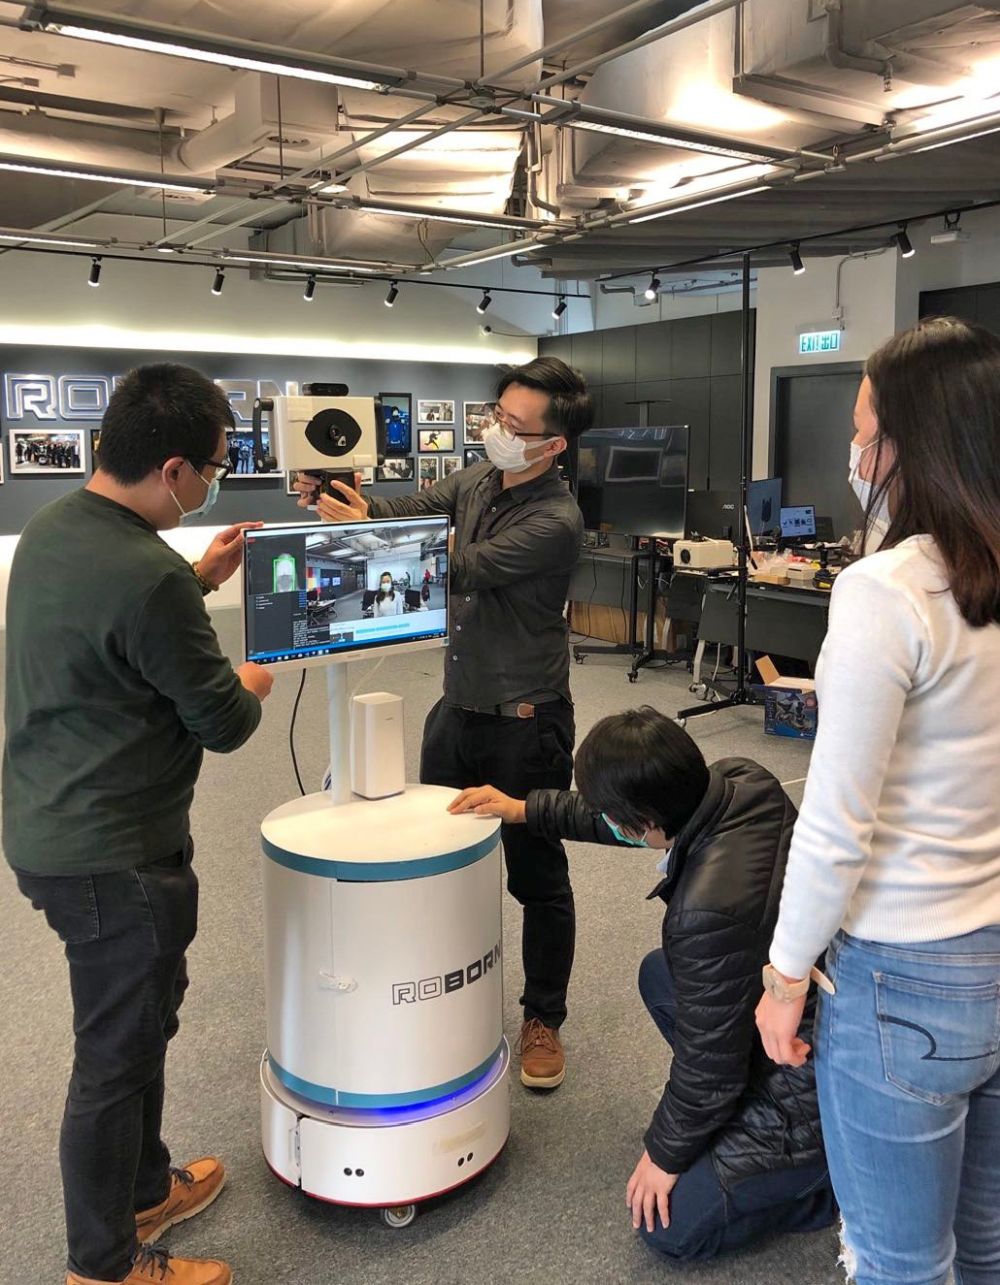 The project team of the technology company is installing and testing the mobile fever screening robot.